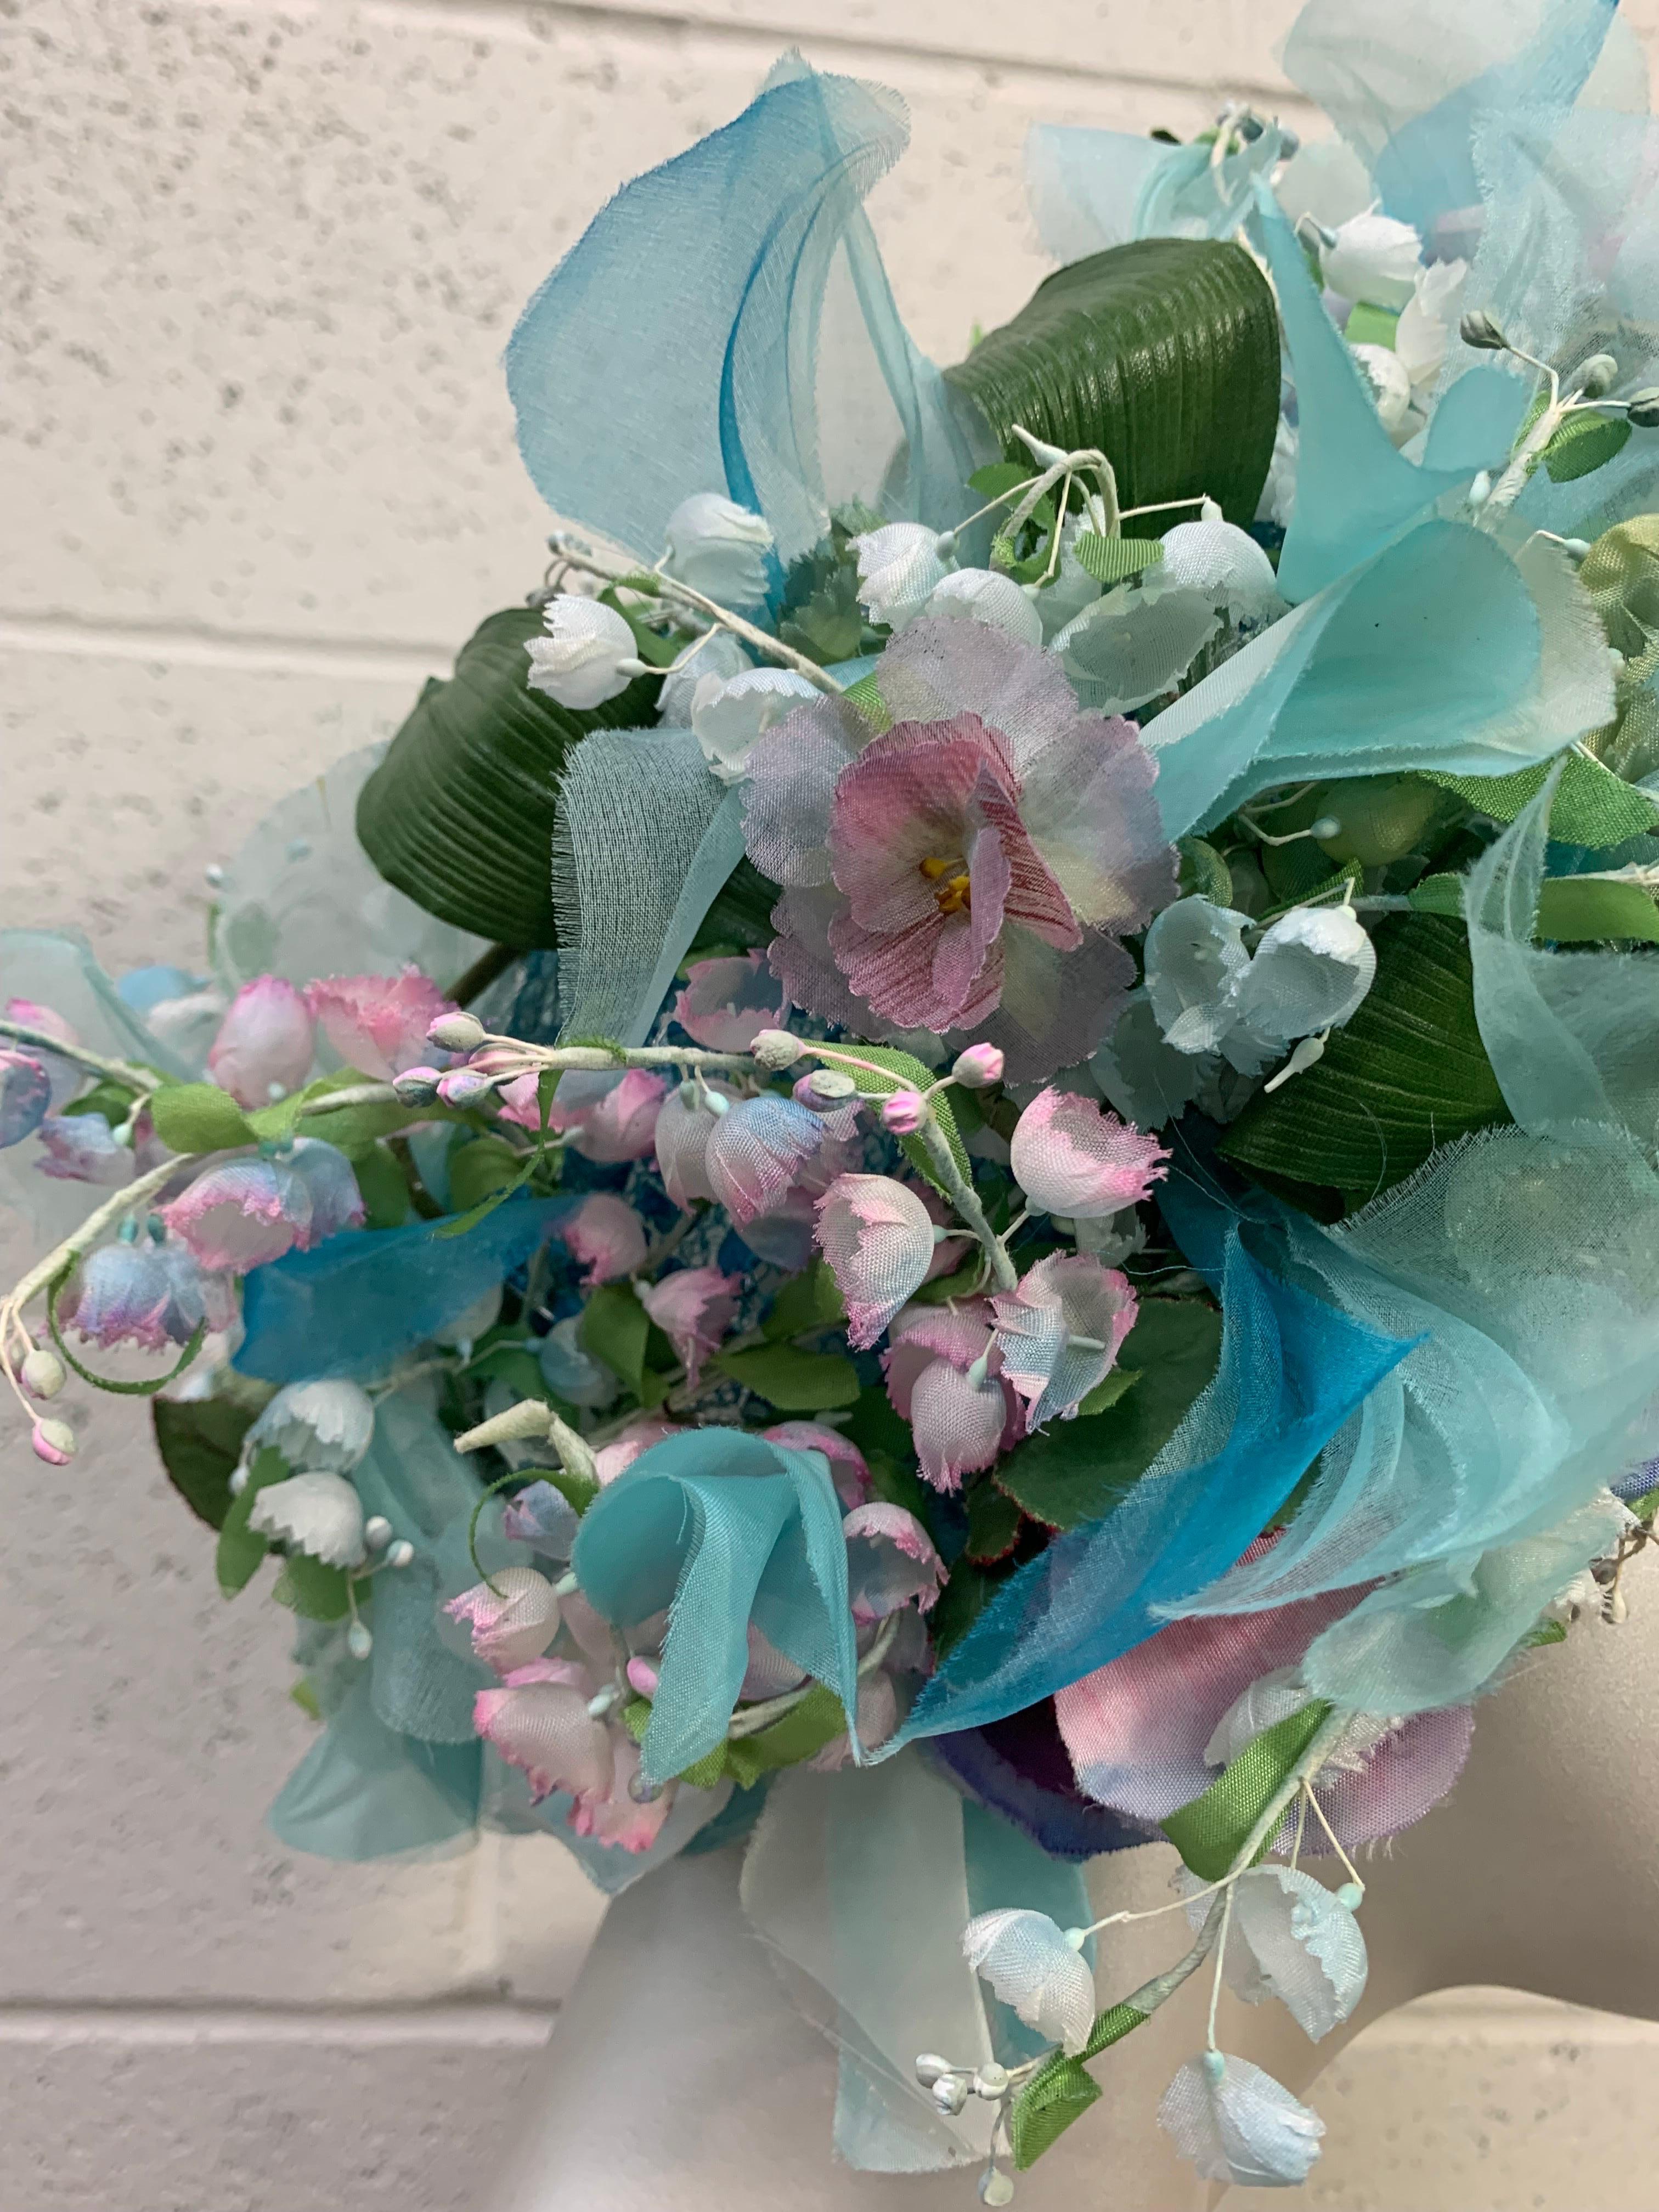 A truly spectacular 1960s Christian Dior Pastel Floral Hat:  A wreath or turban with open netted crown in pastel silks of turquoise, green, purples and white lily of the valley. Blue open net crown. Lots of volume and drama in this beauty!  Its not